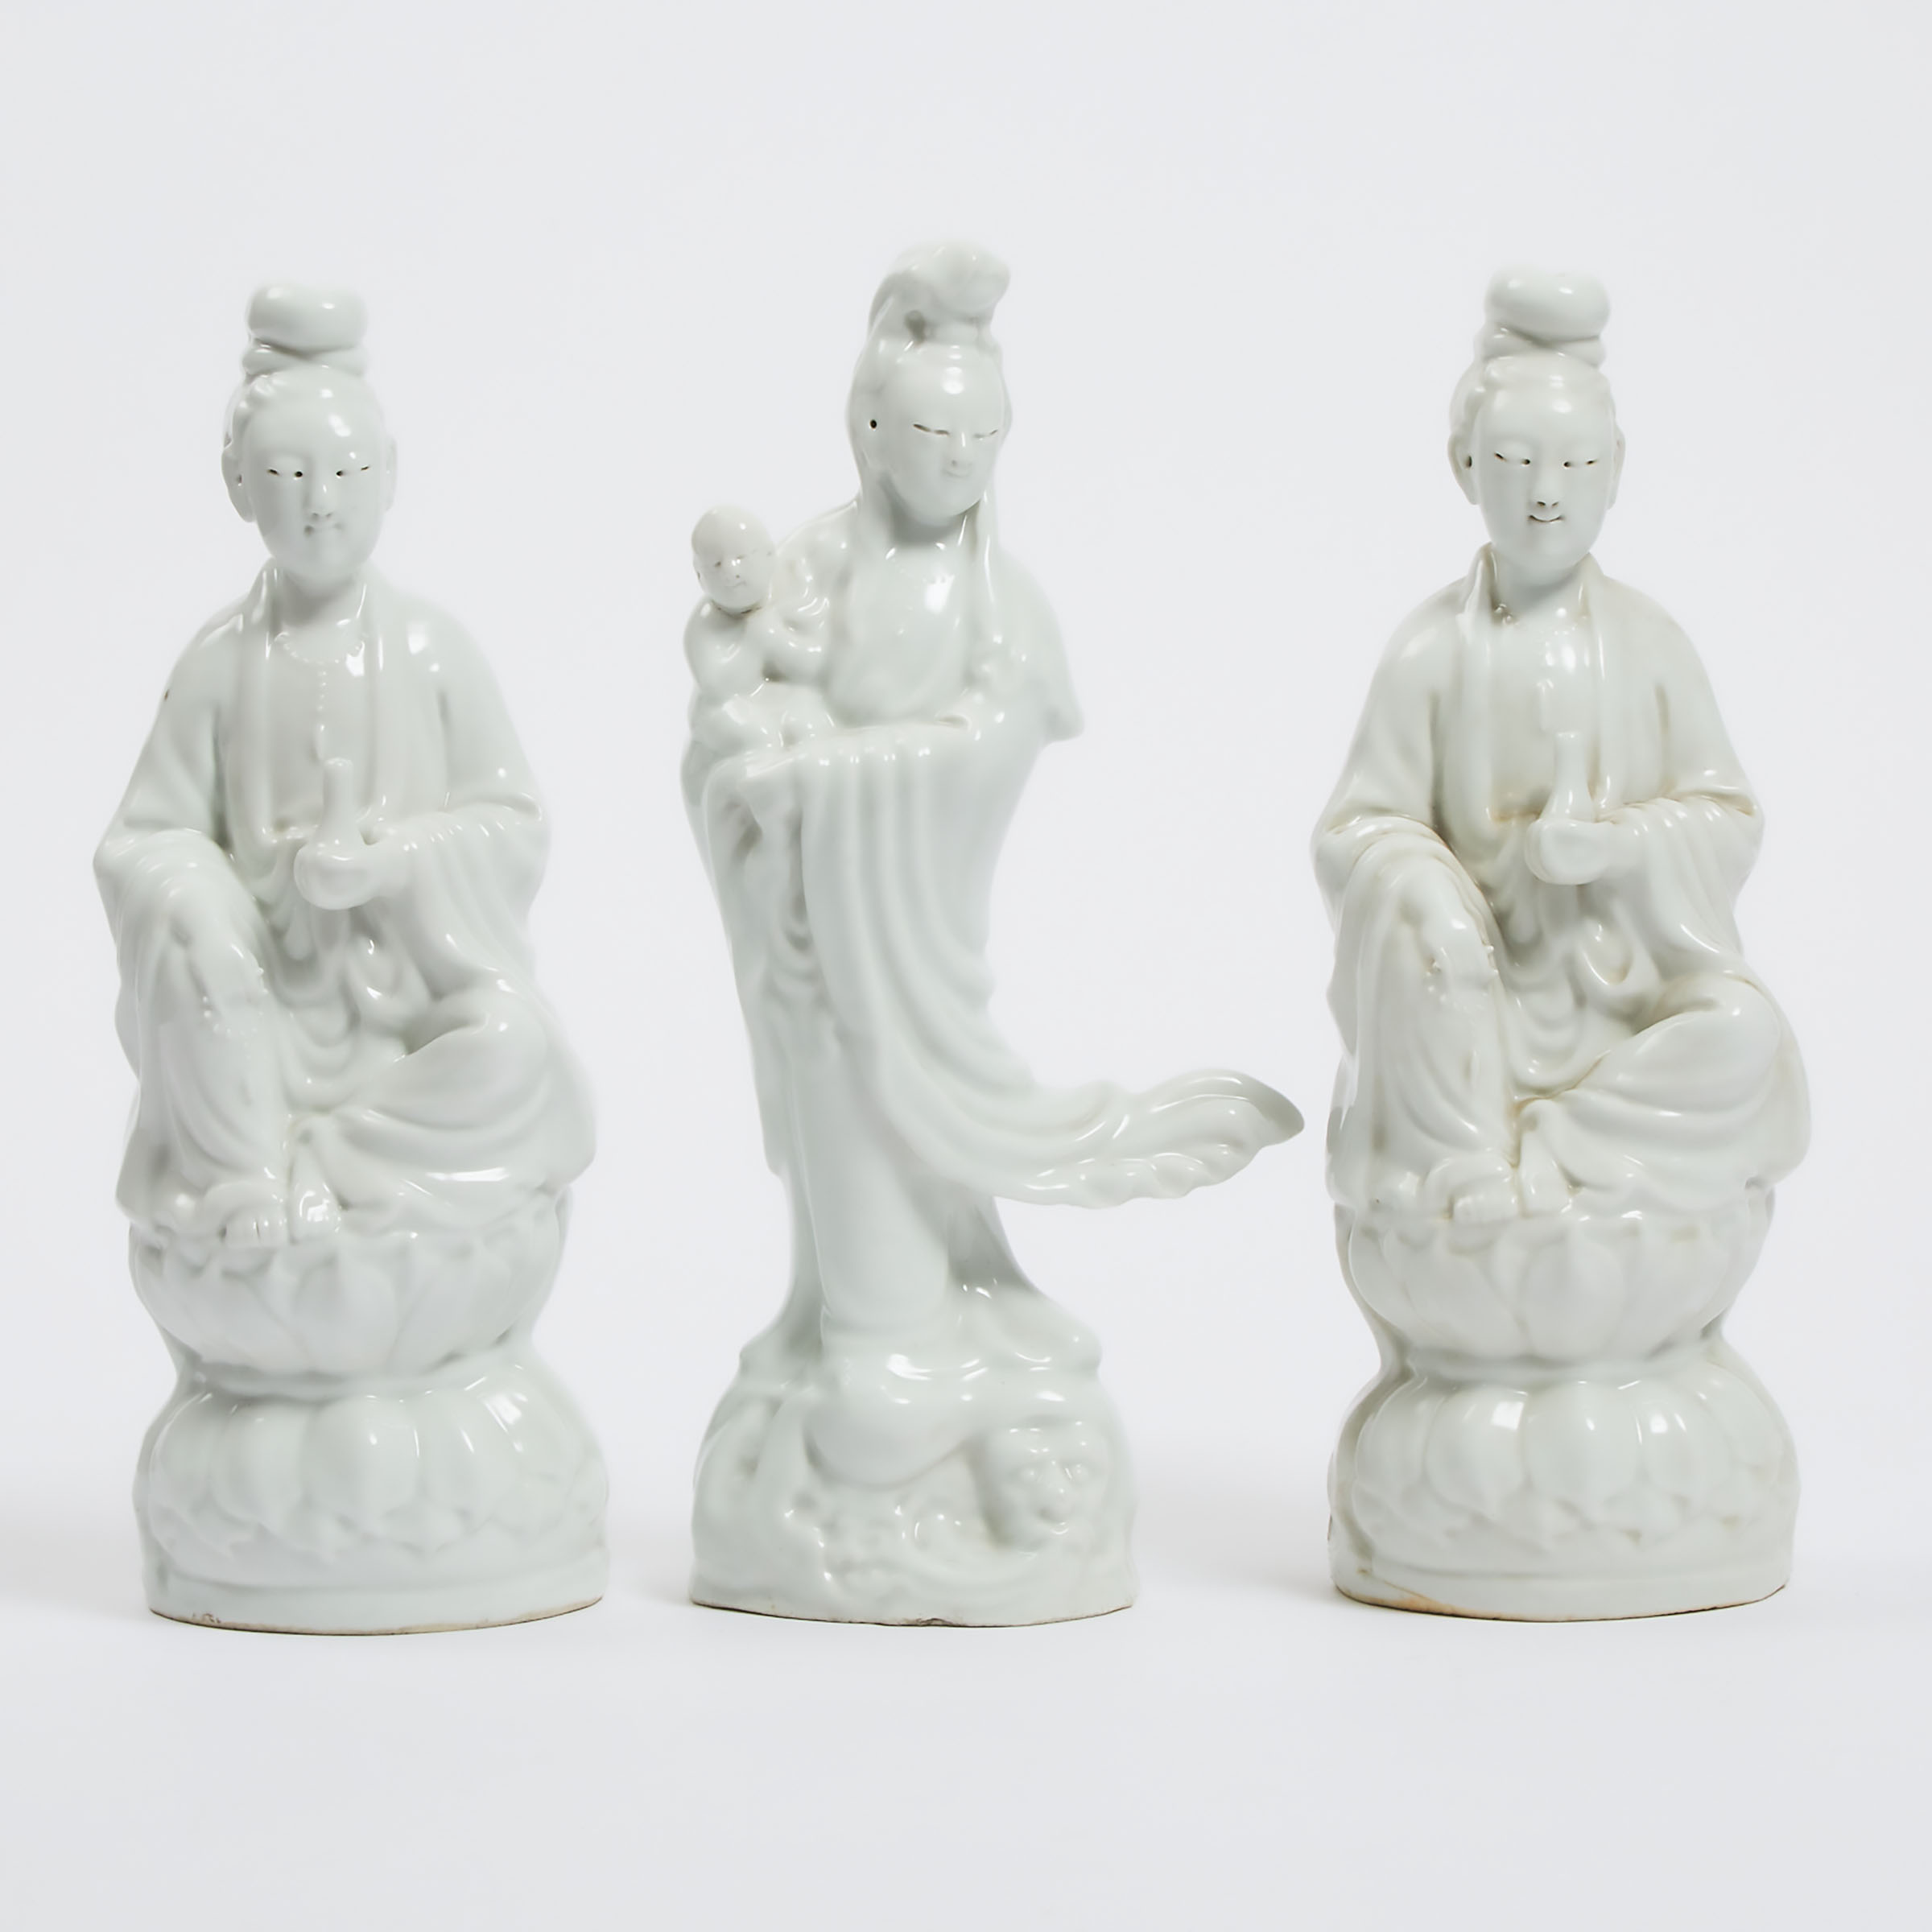 A Group of Three Blanc de Chine Figures, Mid 20th Century